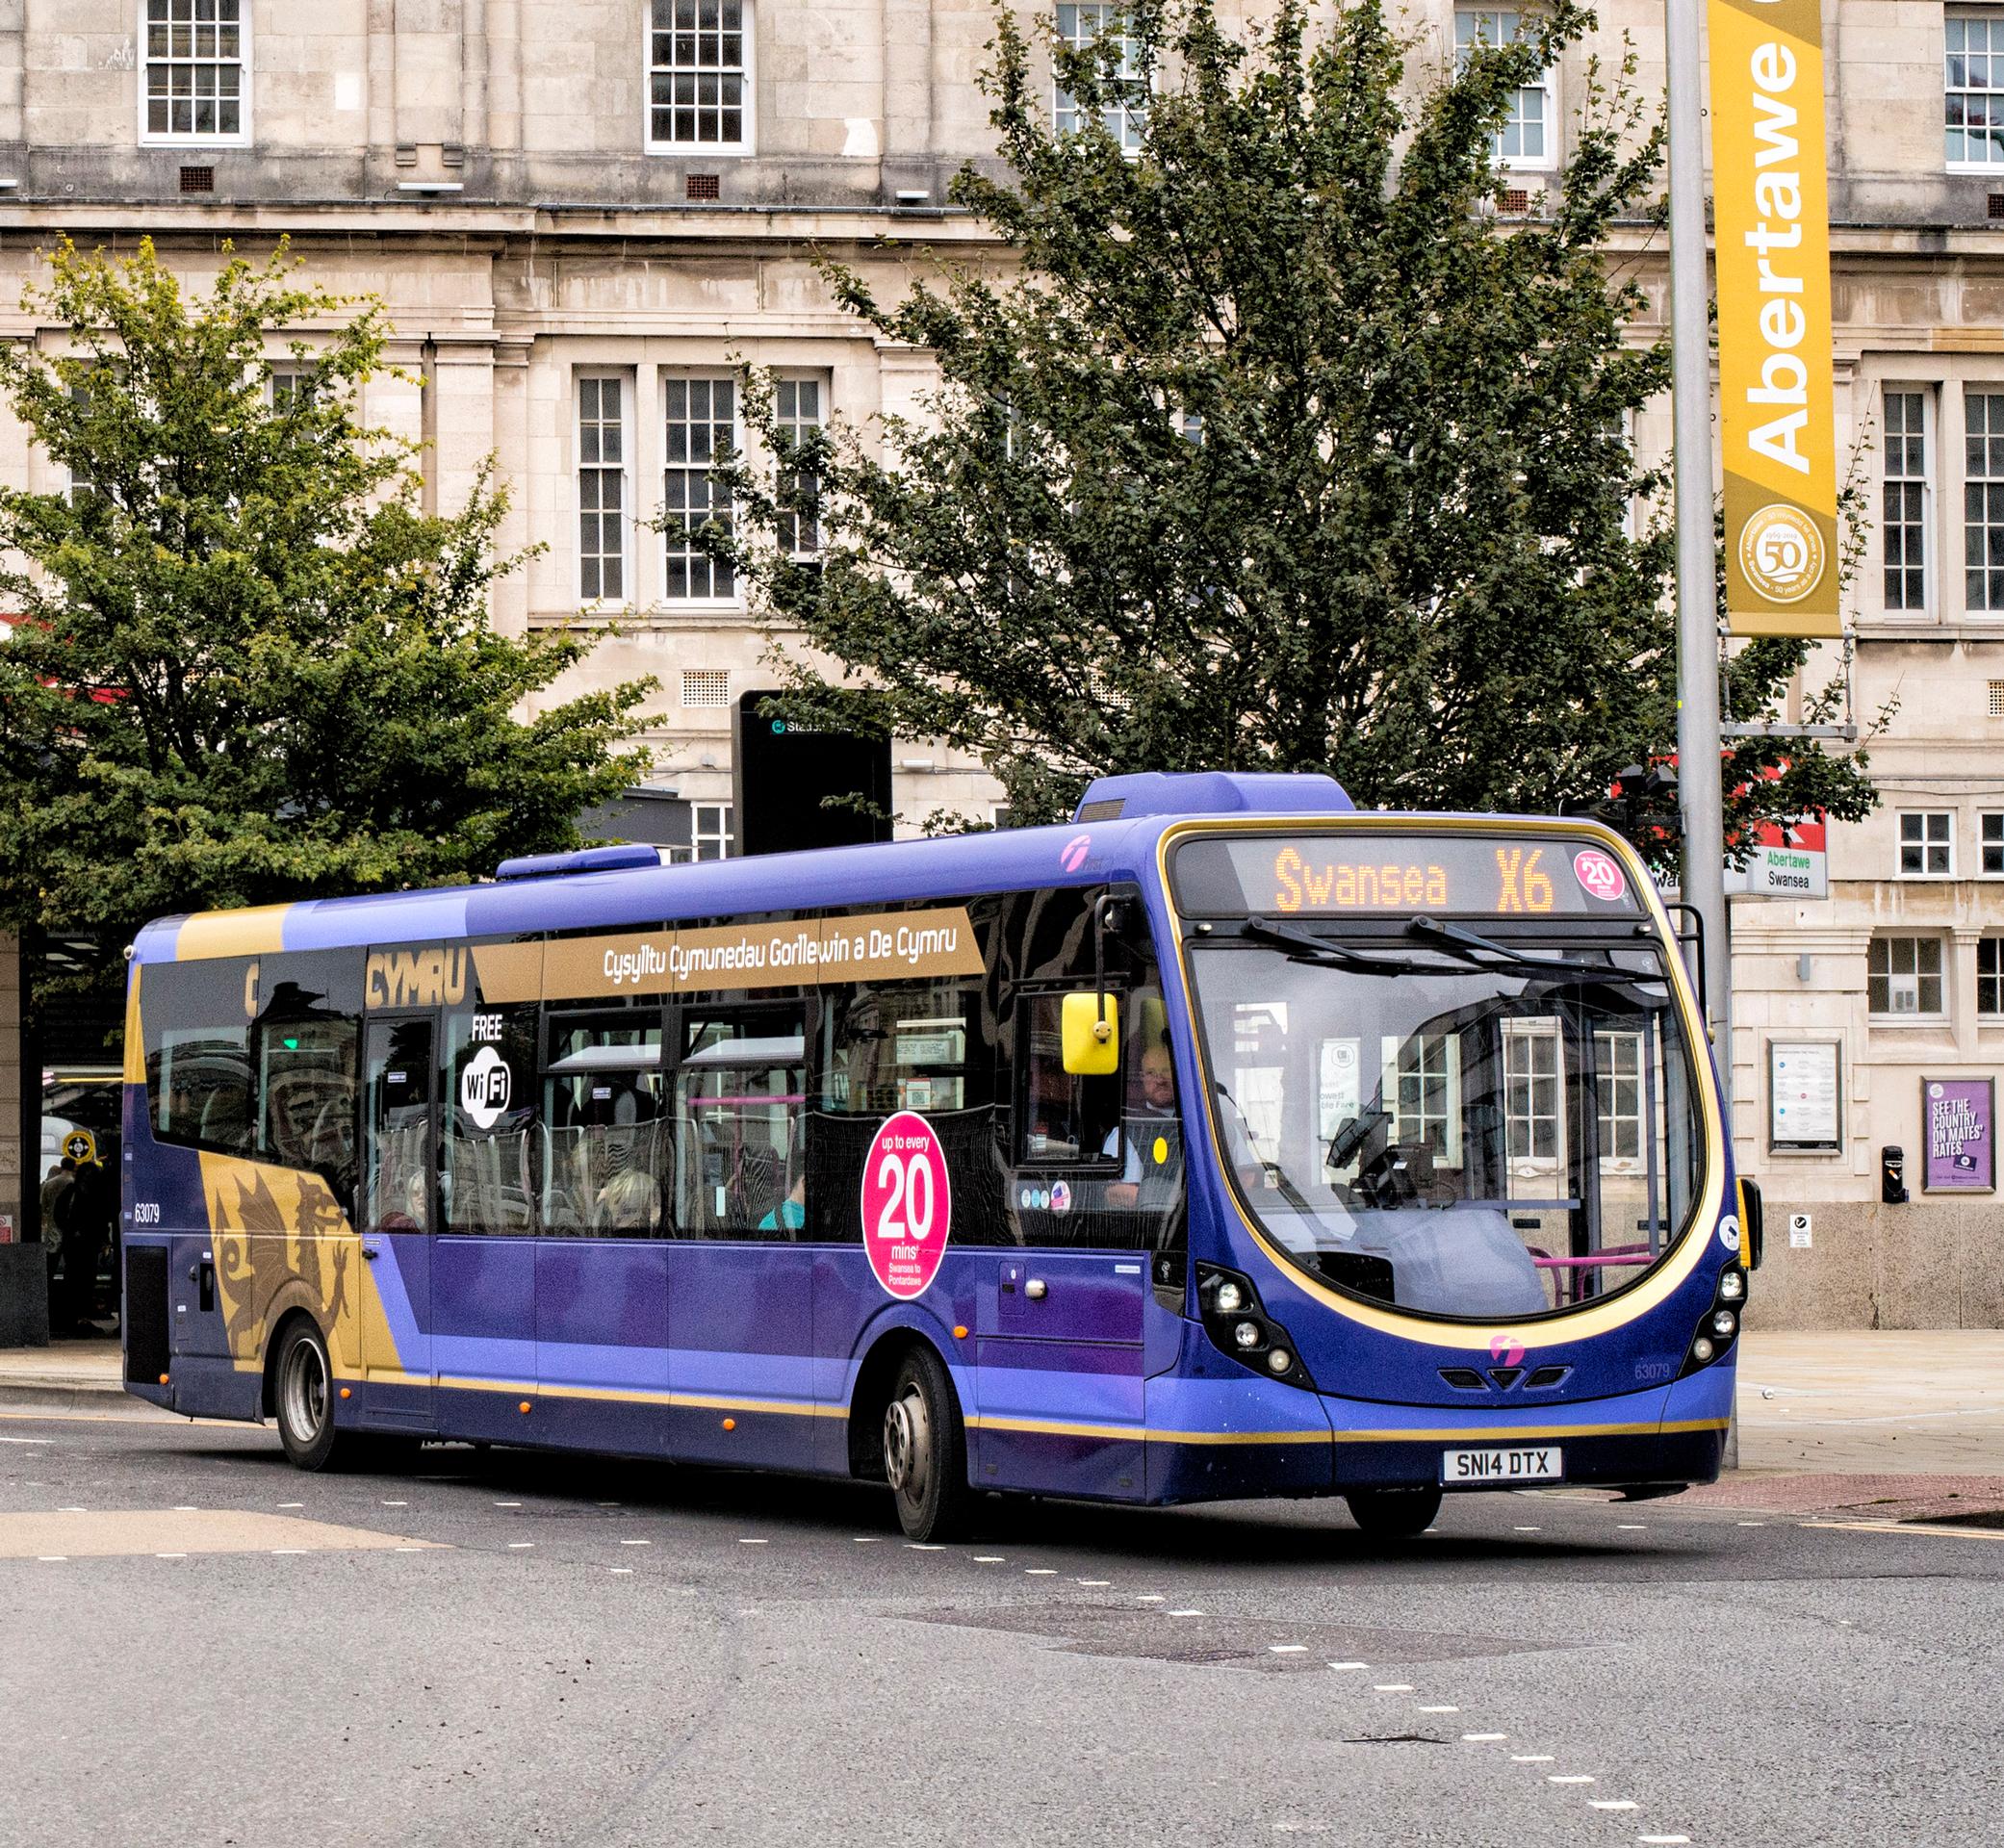 Free bus travel on Swansea buses from Friday to Monday